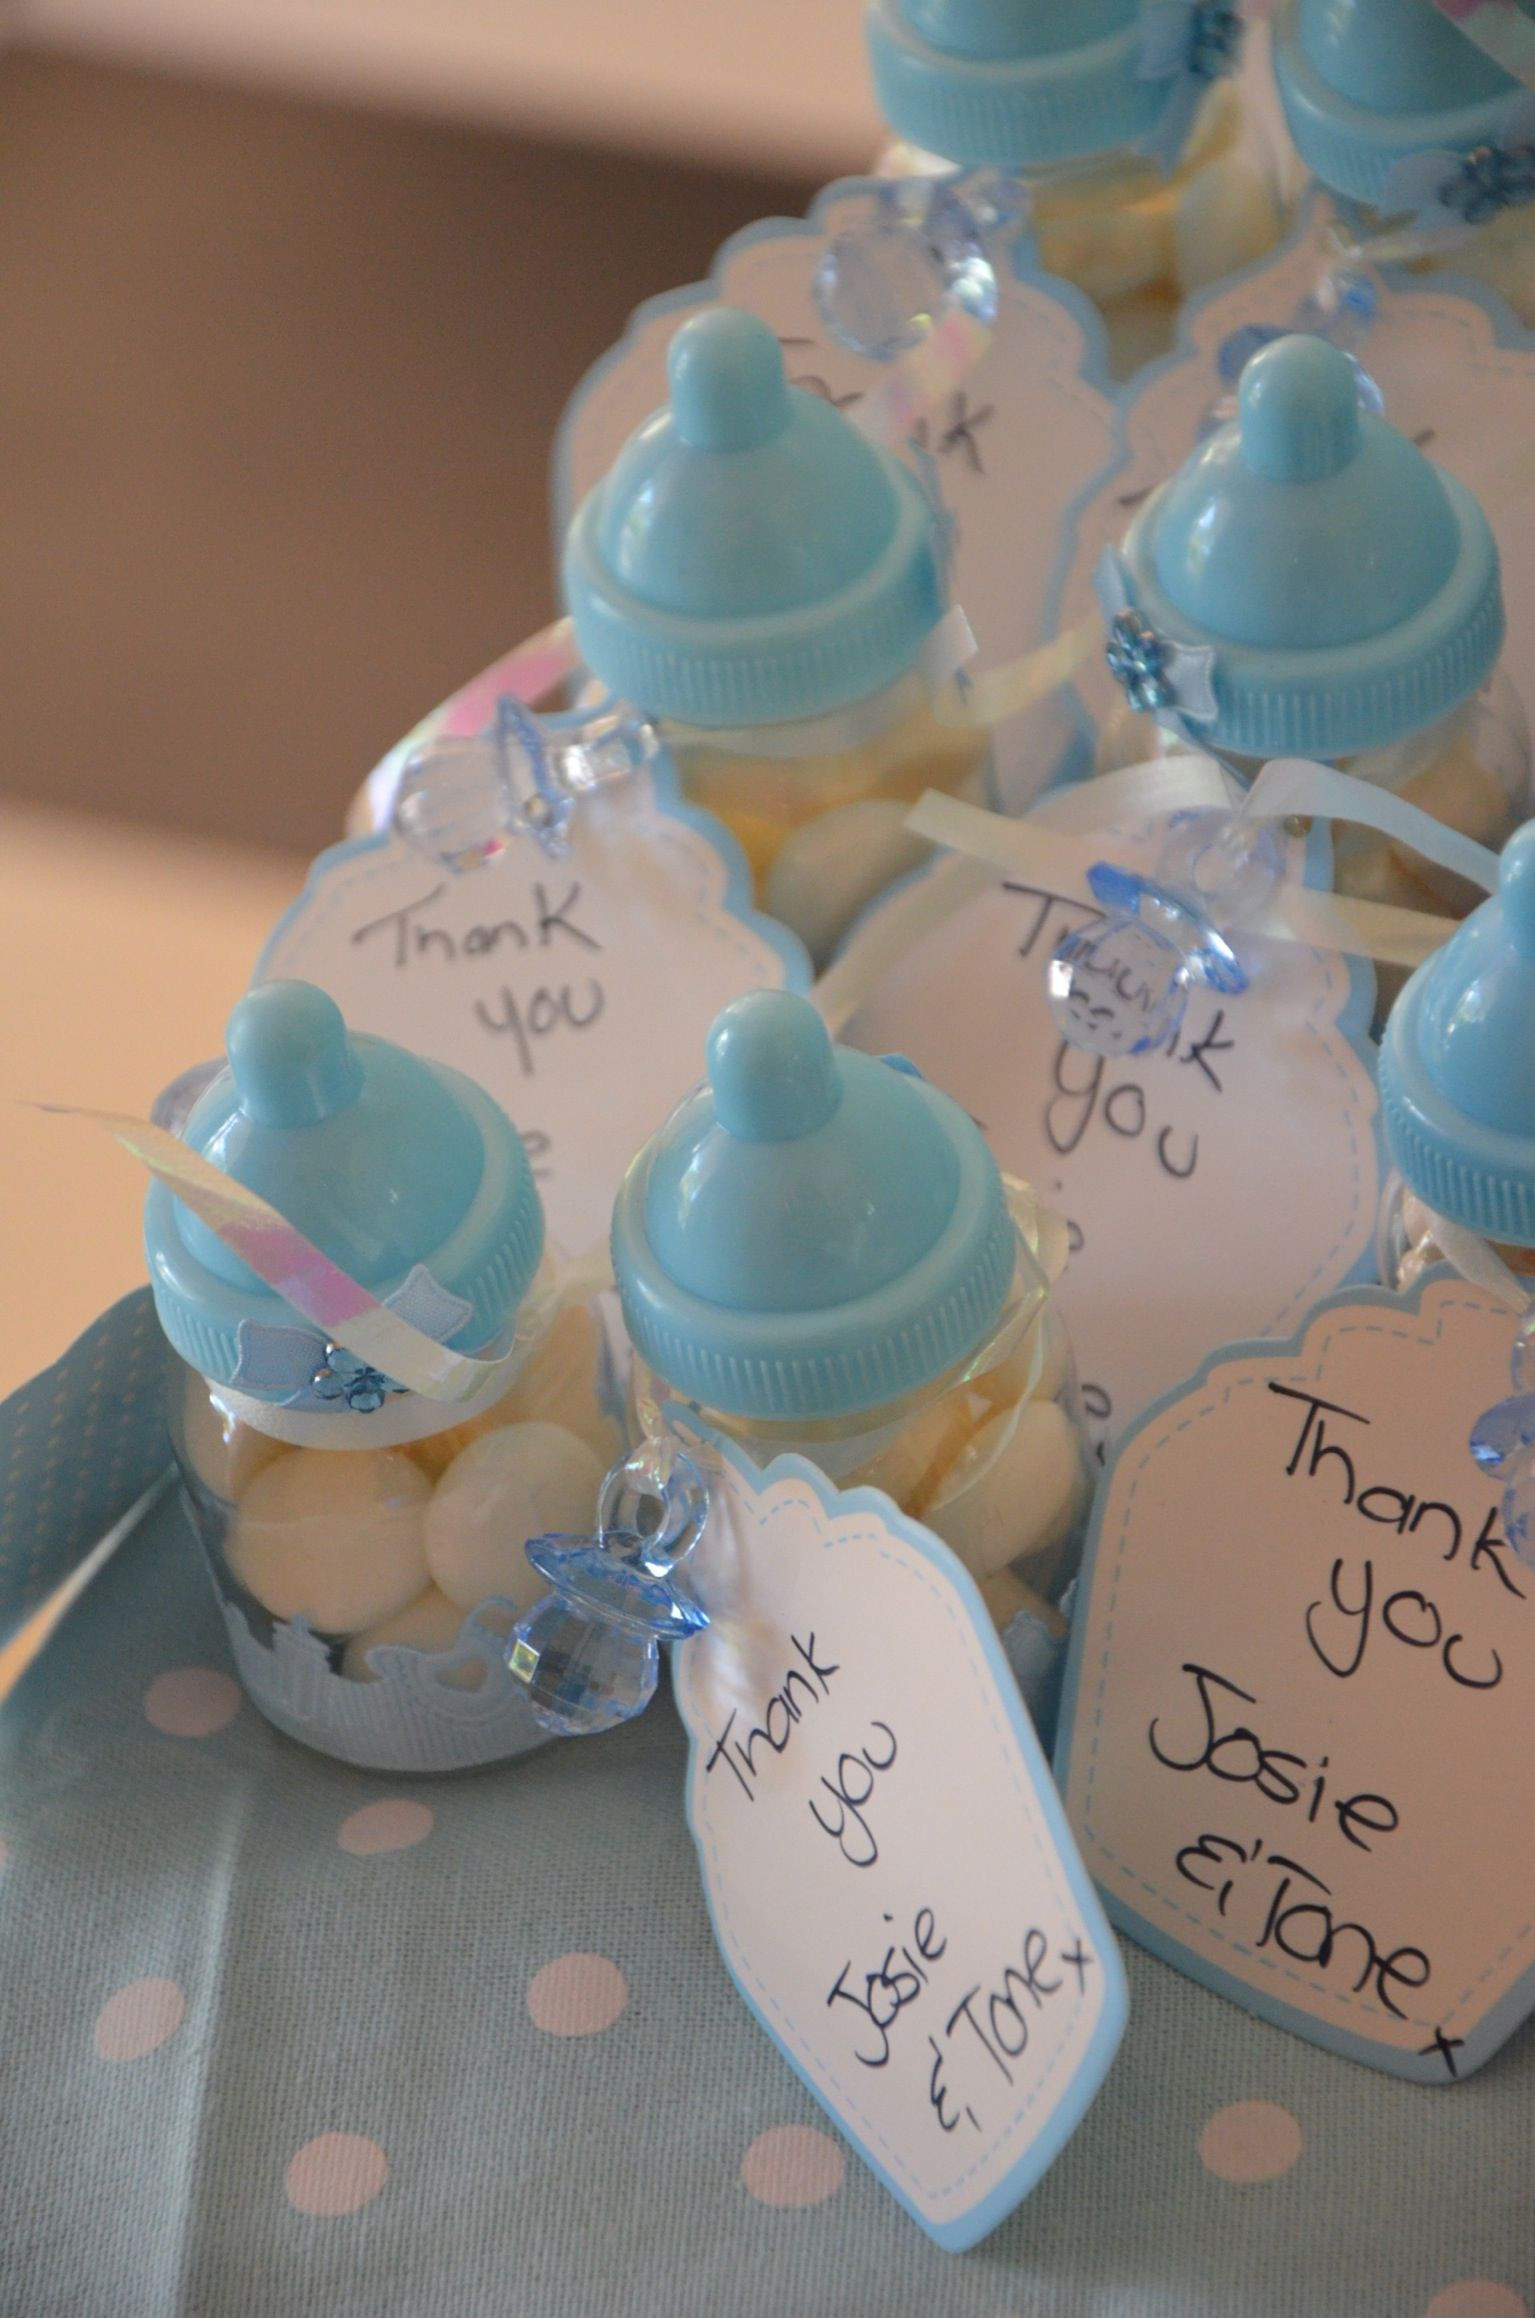 Thank You Gifts For Baby Shower Guests
 Thank you t for guests